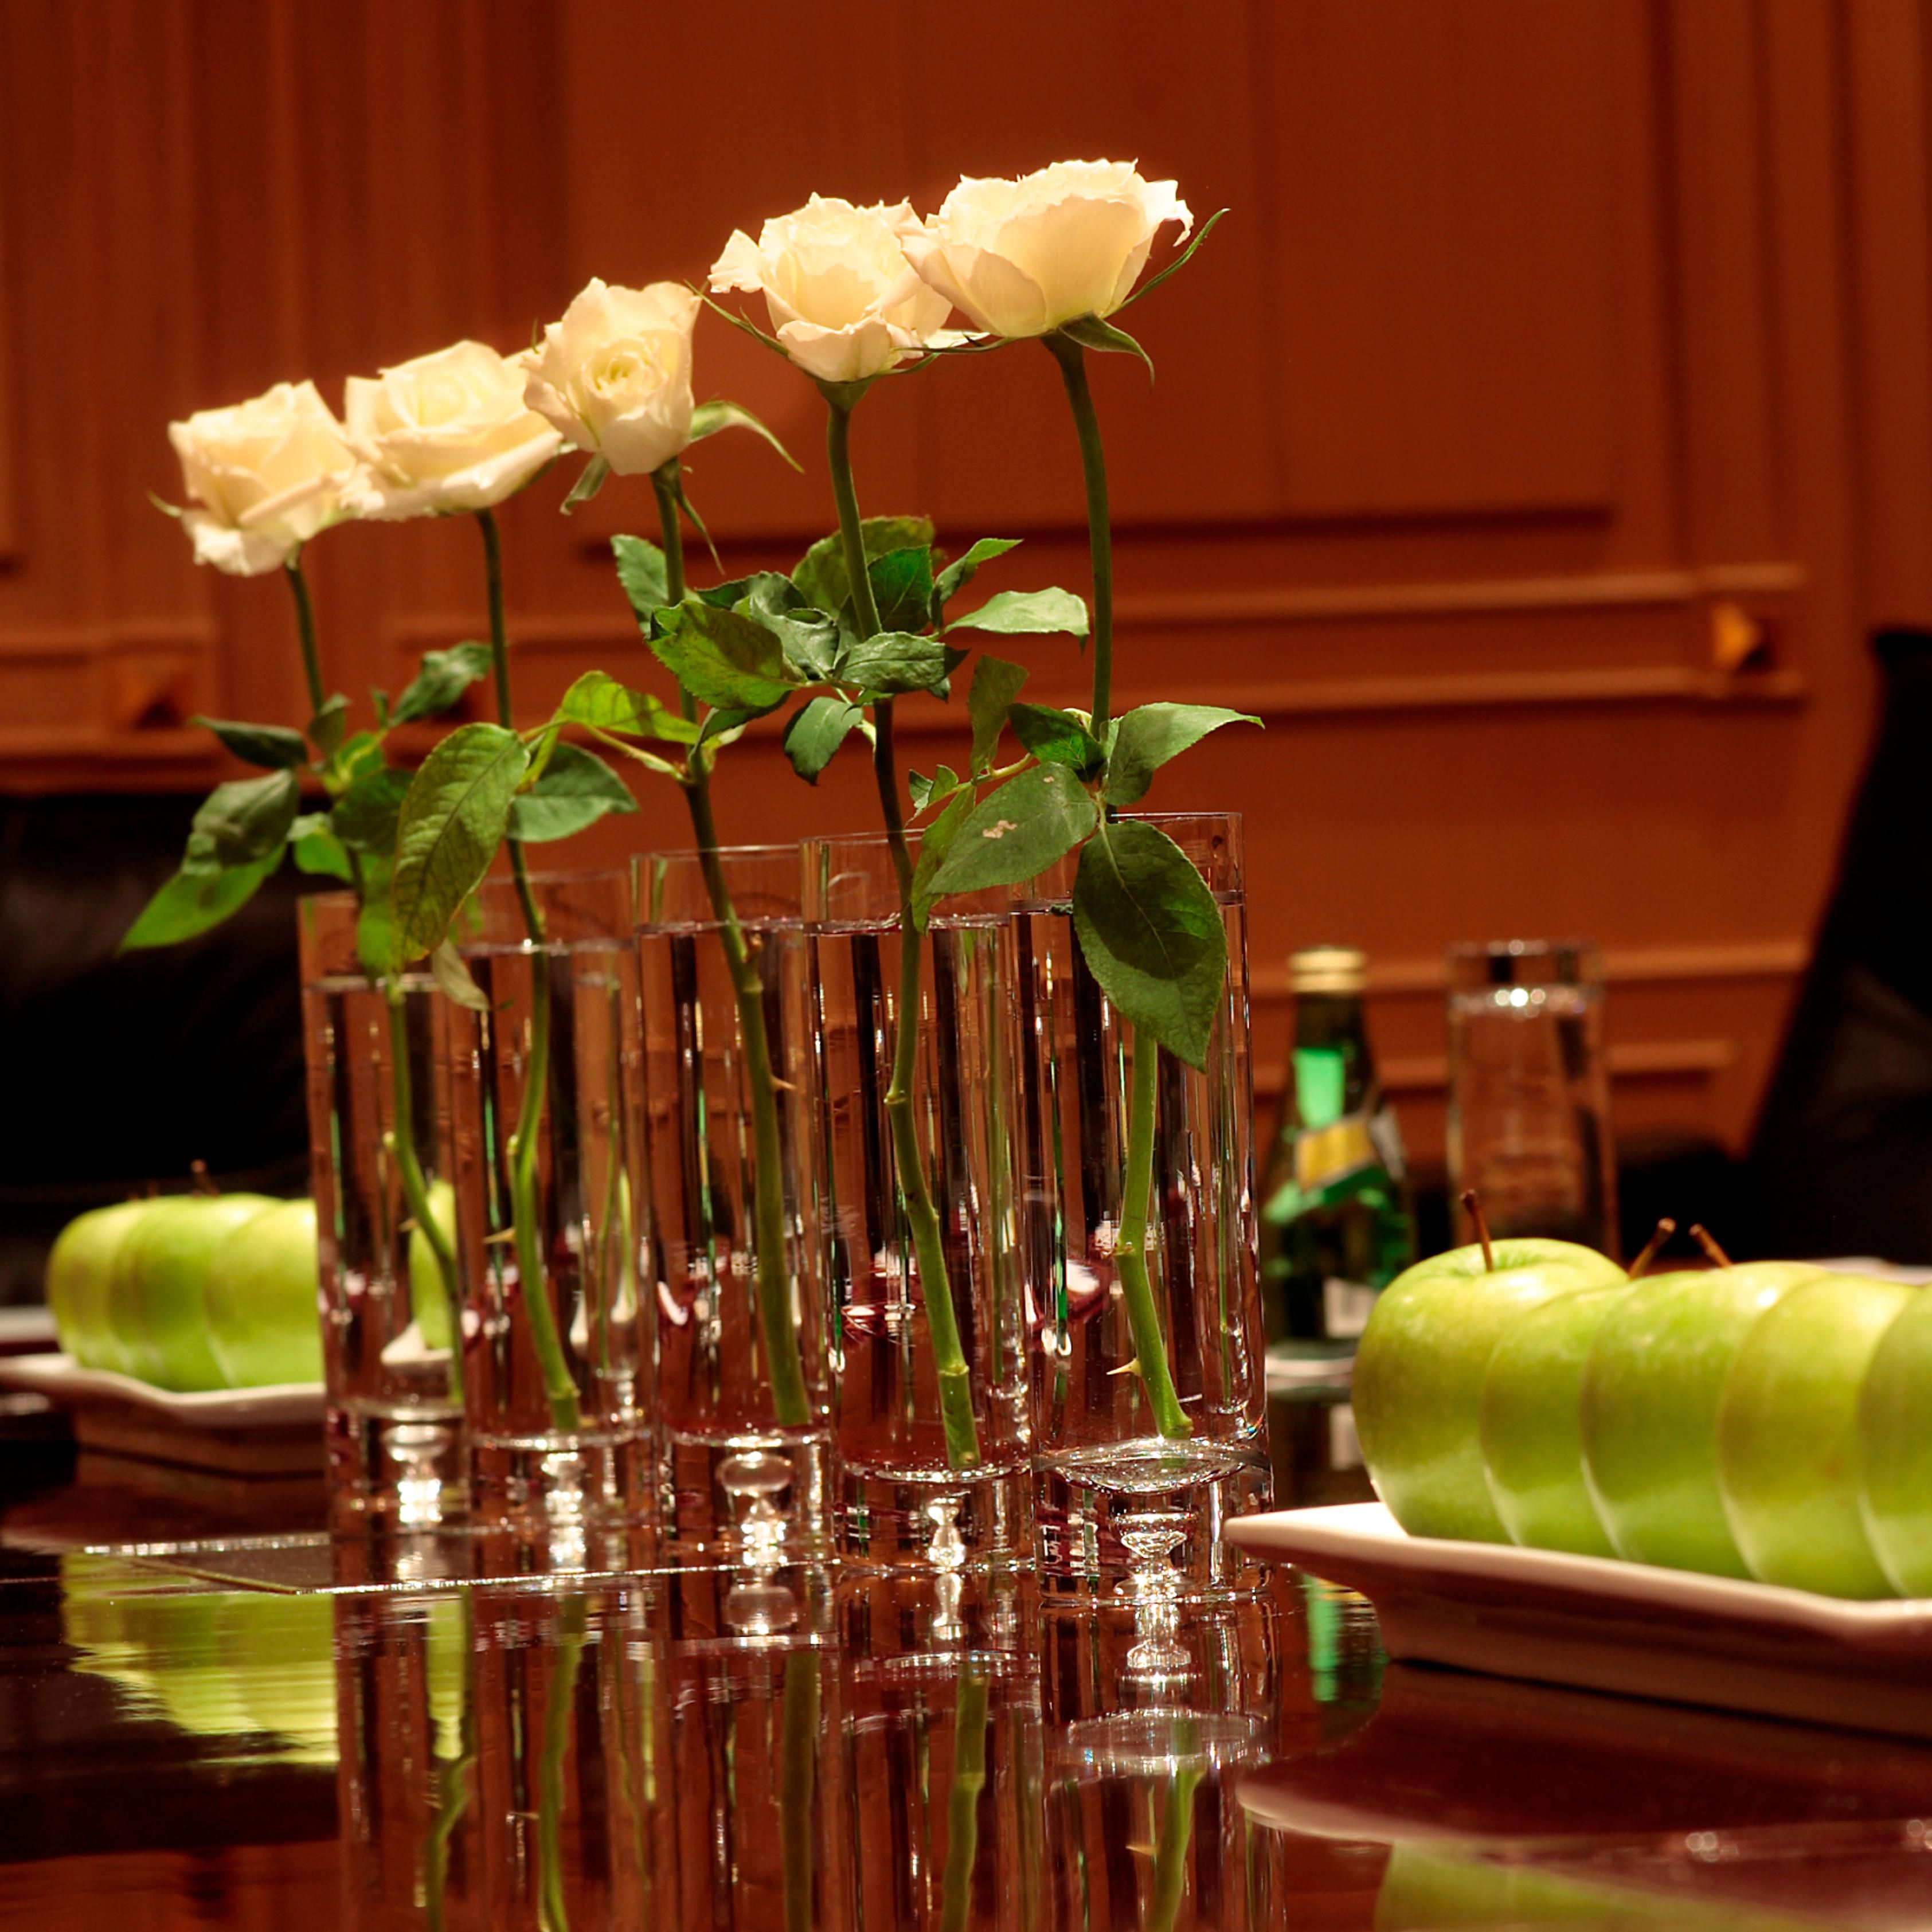 Let our team take care of your meeting needs, down to every detail